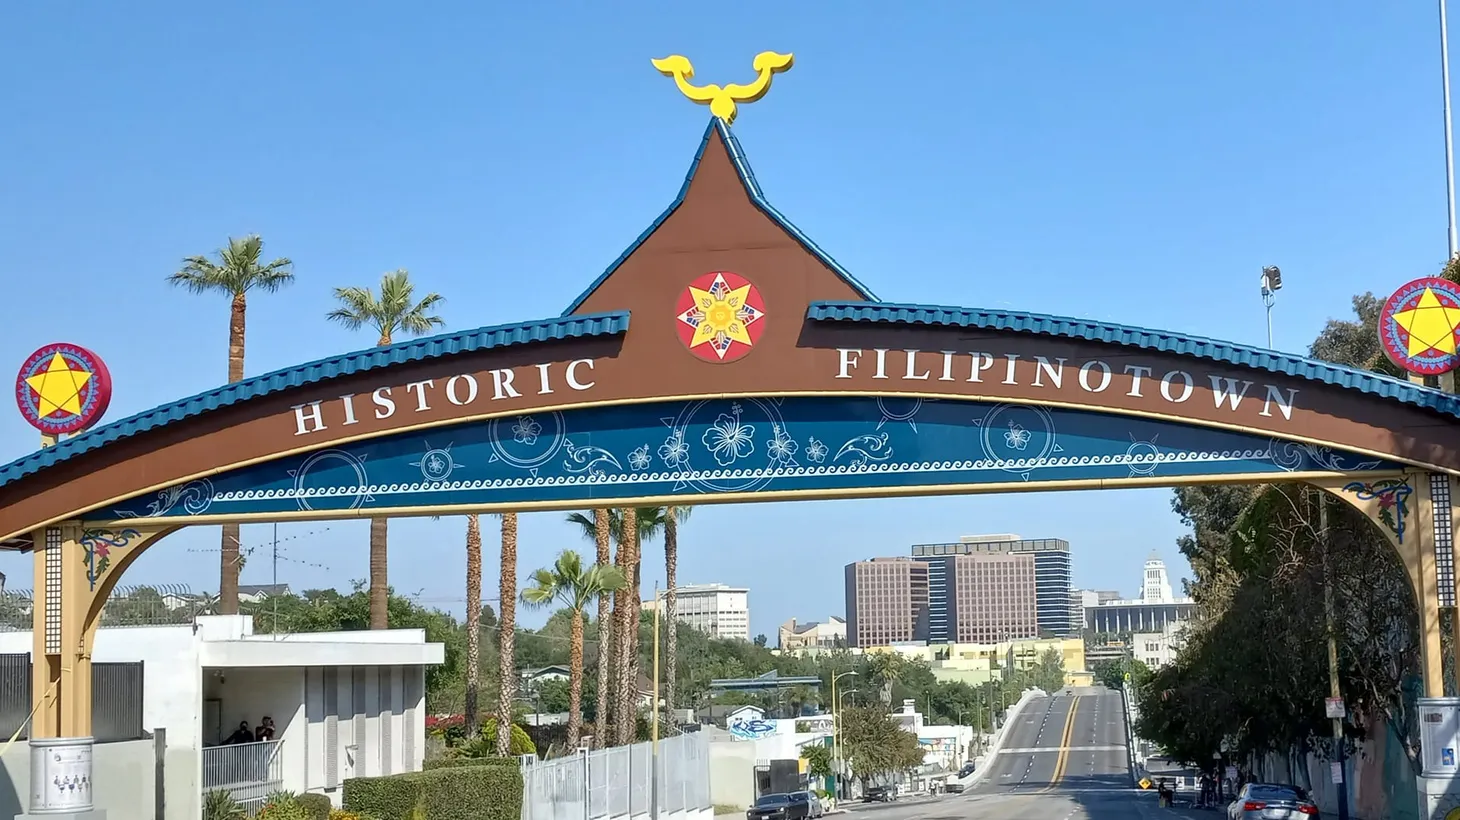 Historic Filipinotown arch honors immigrants, after 20 years in the making